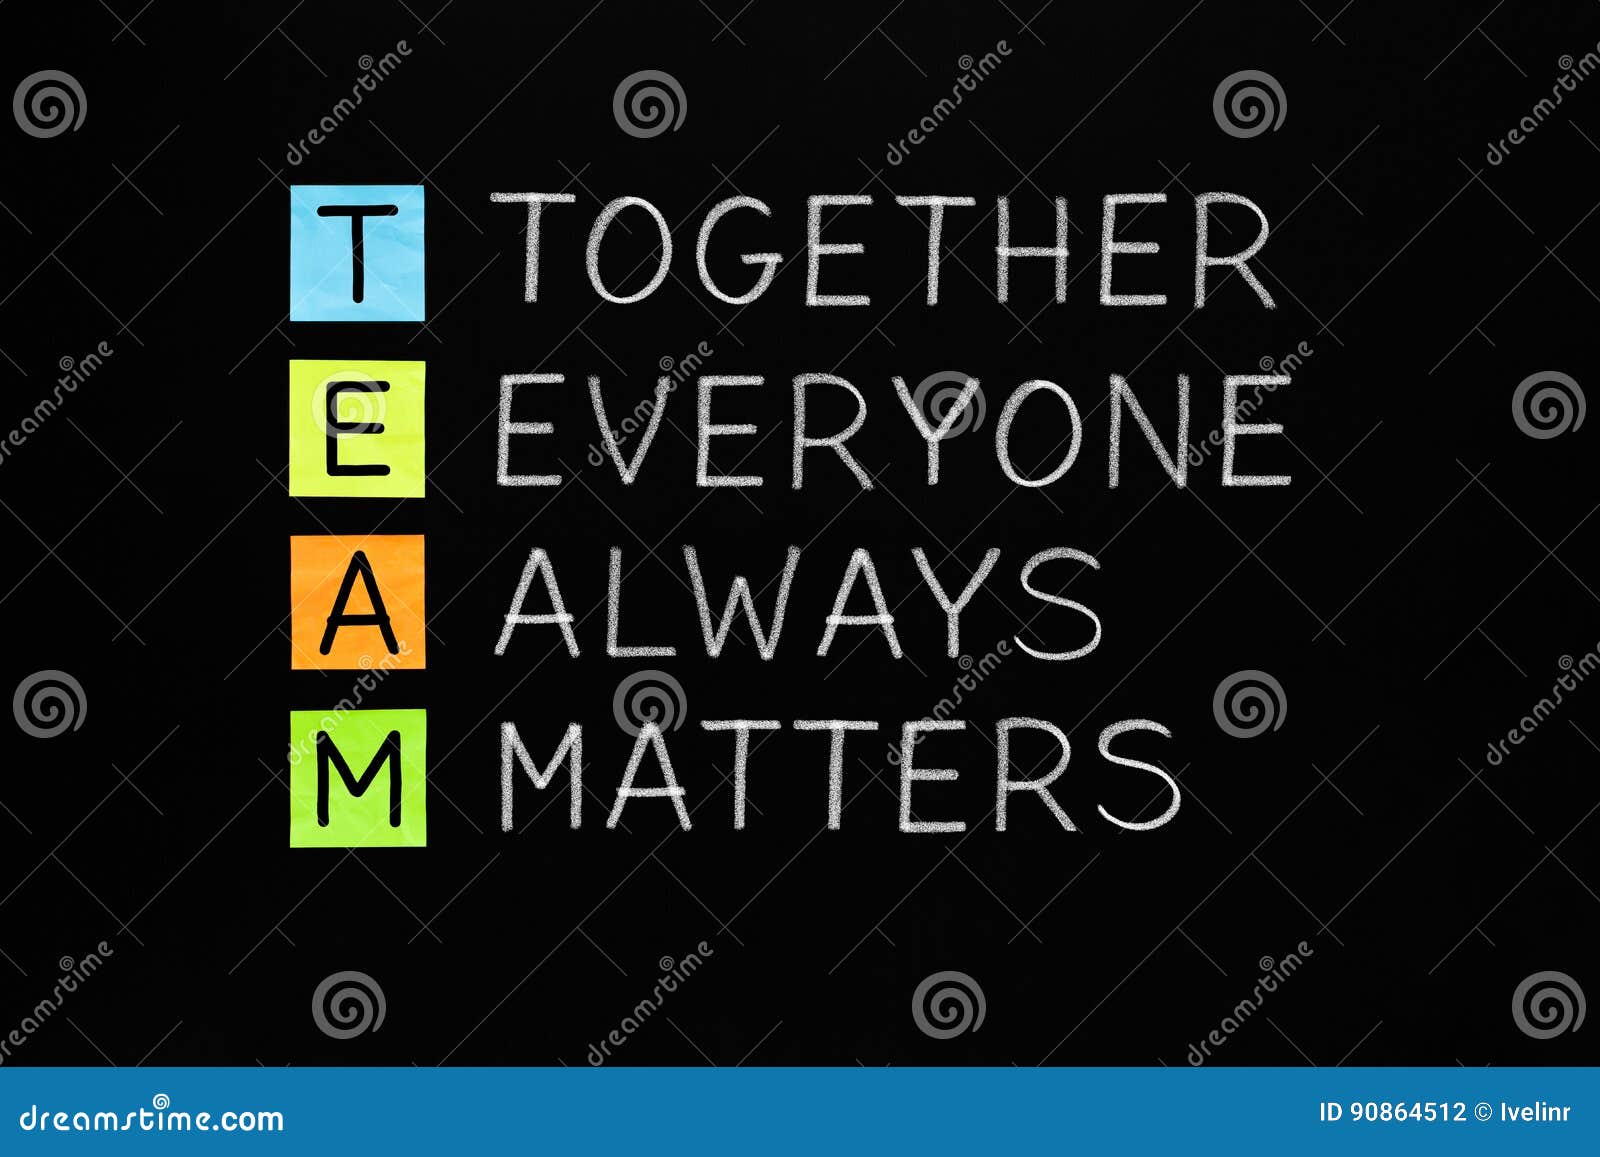 team together everyone always matters